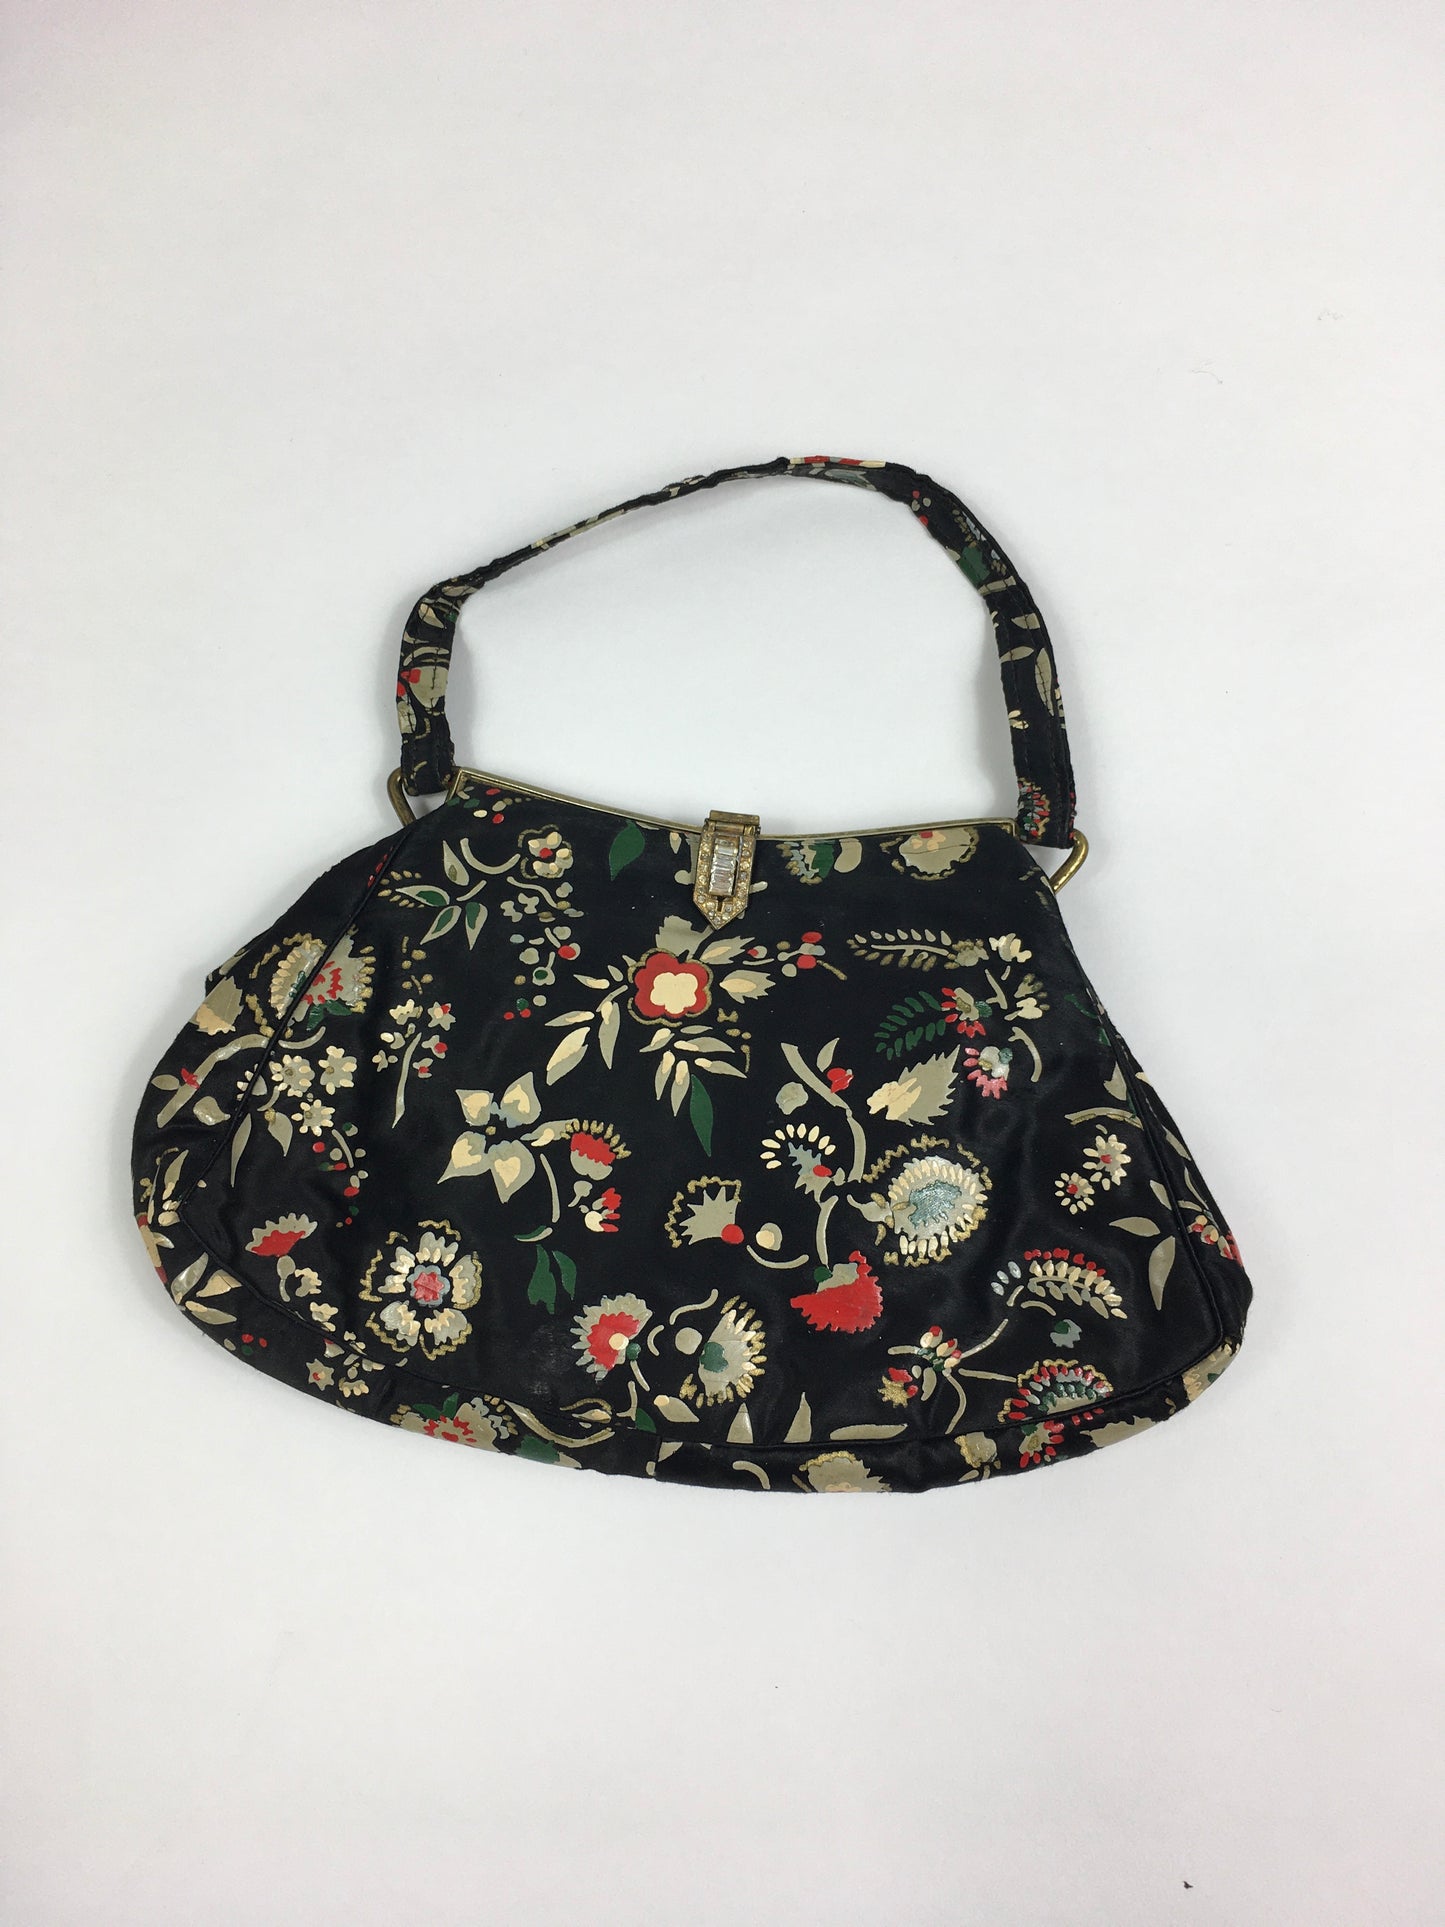 Original 1930’s Exquisite  Evening Bag - In The Most Beautiful Handpainted Delicate Floral